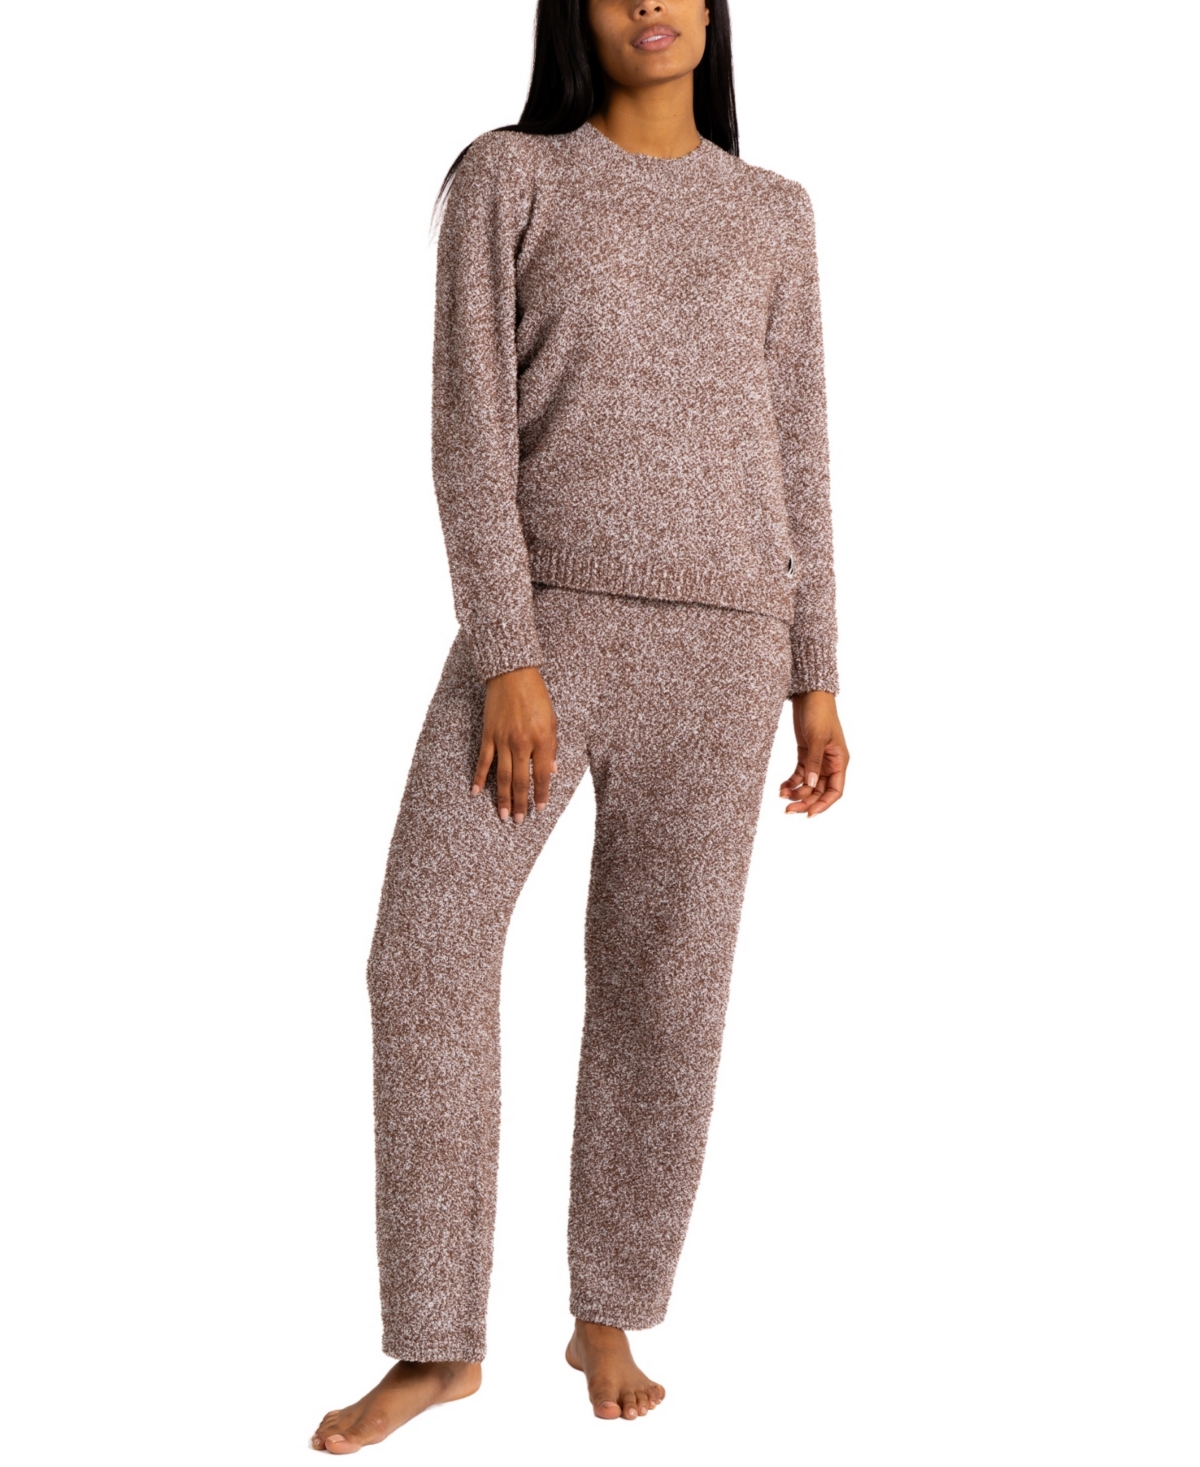 Women's Lounge and Sleepwear Set with Cozy Teddy Long Sleeve Top and Wide Leg Pants - Marled deep taupe